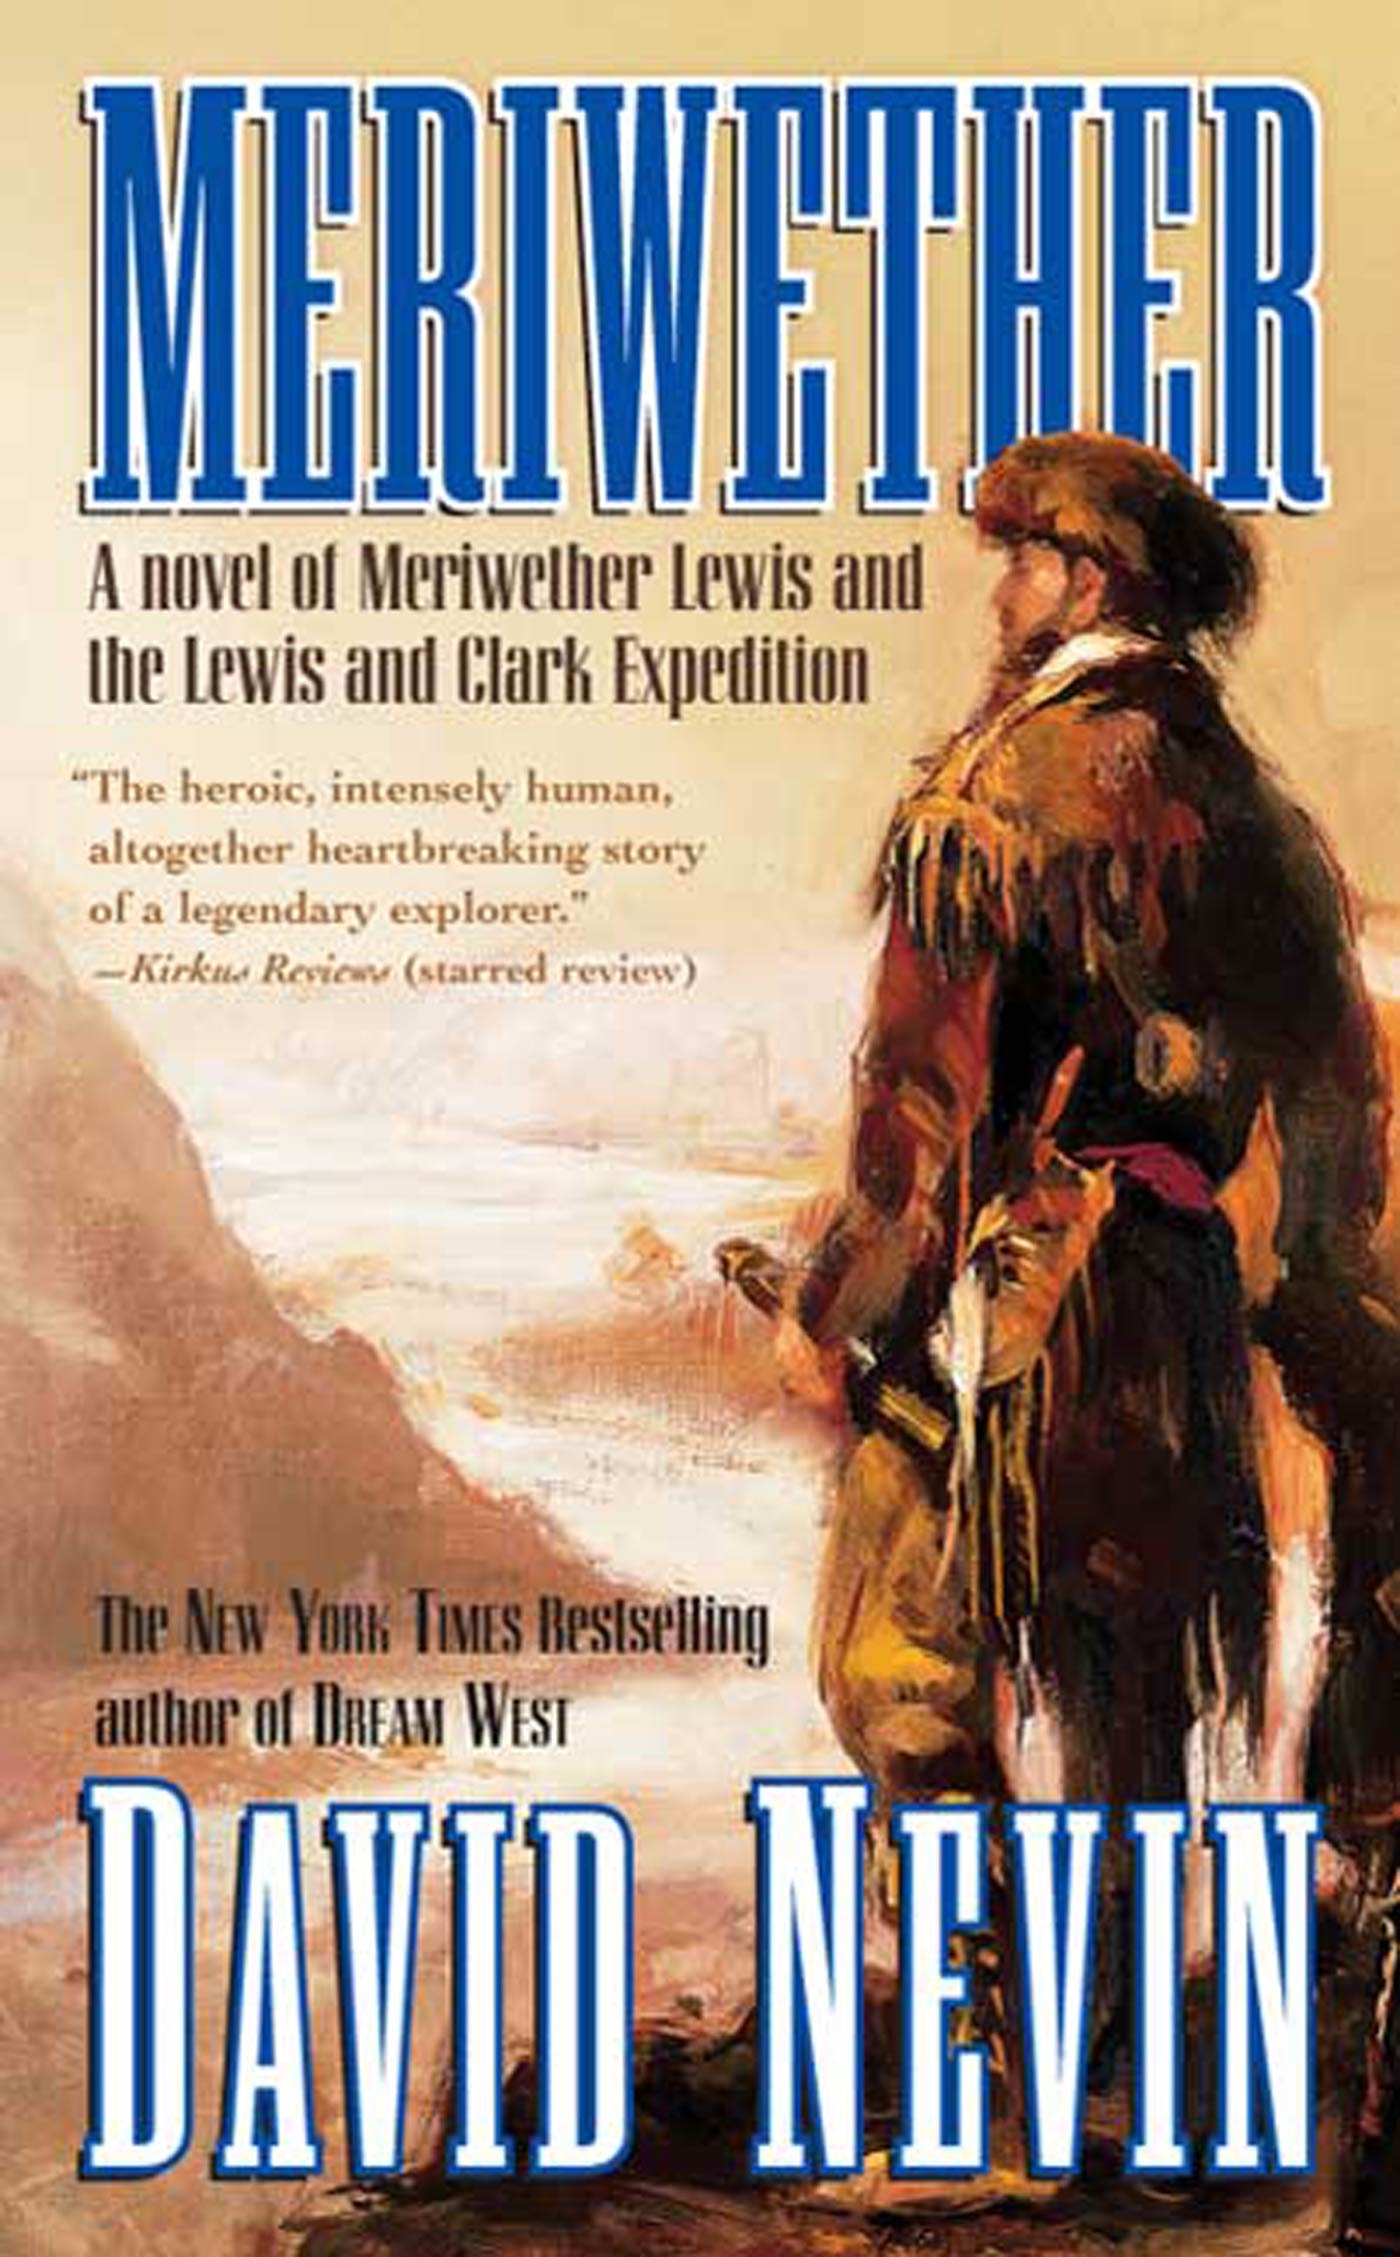 Meriwether : A Novel of Meriwether Lewis and the Lewis and Clark Expedition by David Nevin